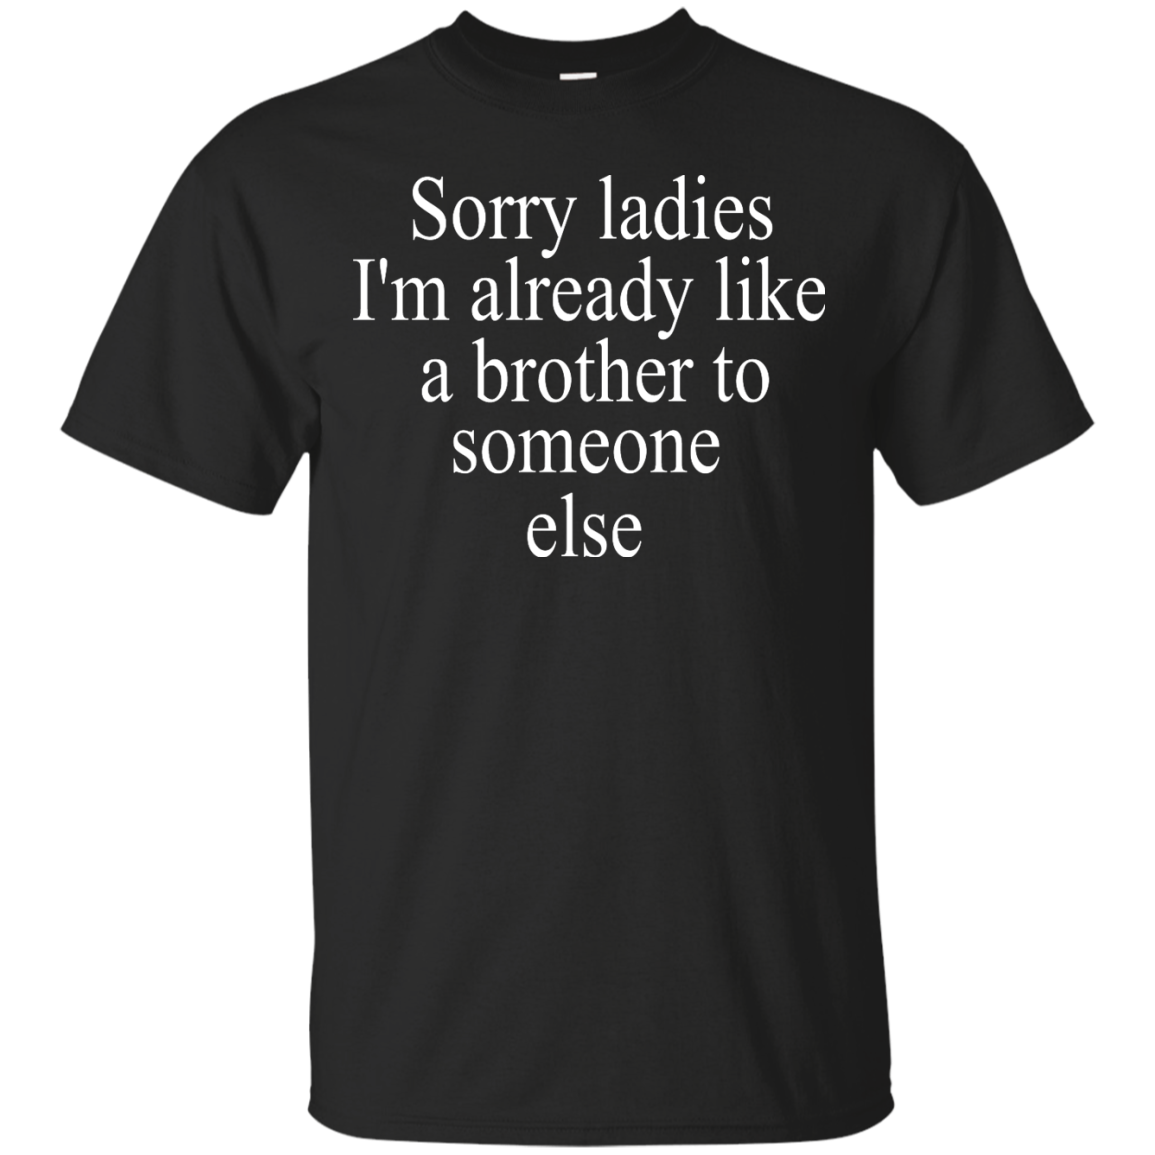 Sorry ladies I'm already like a brother shirt, sweater, tank